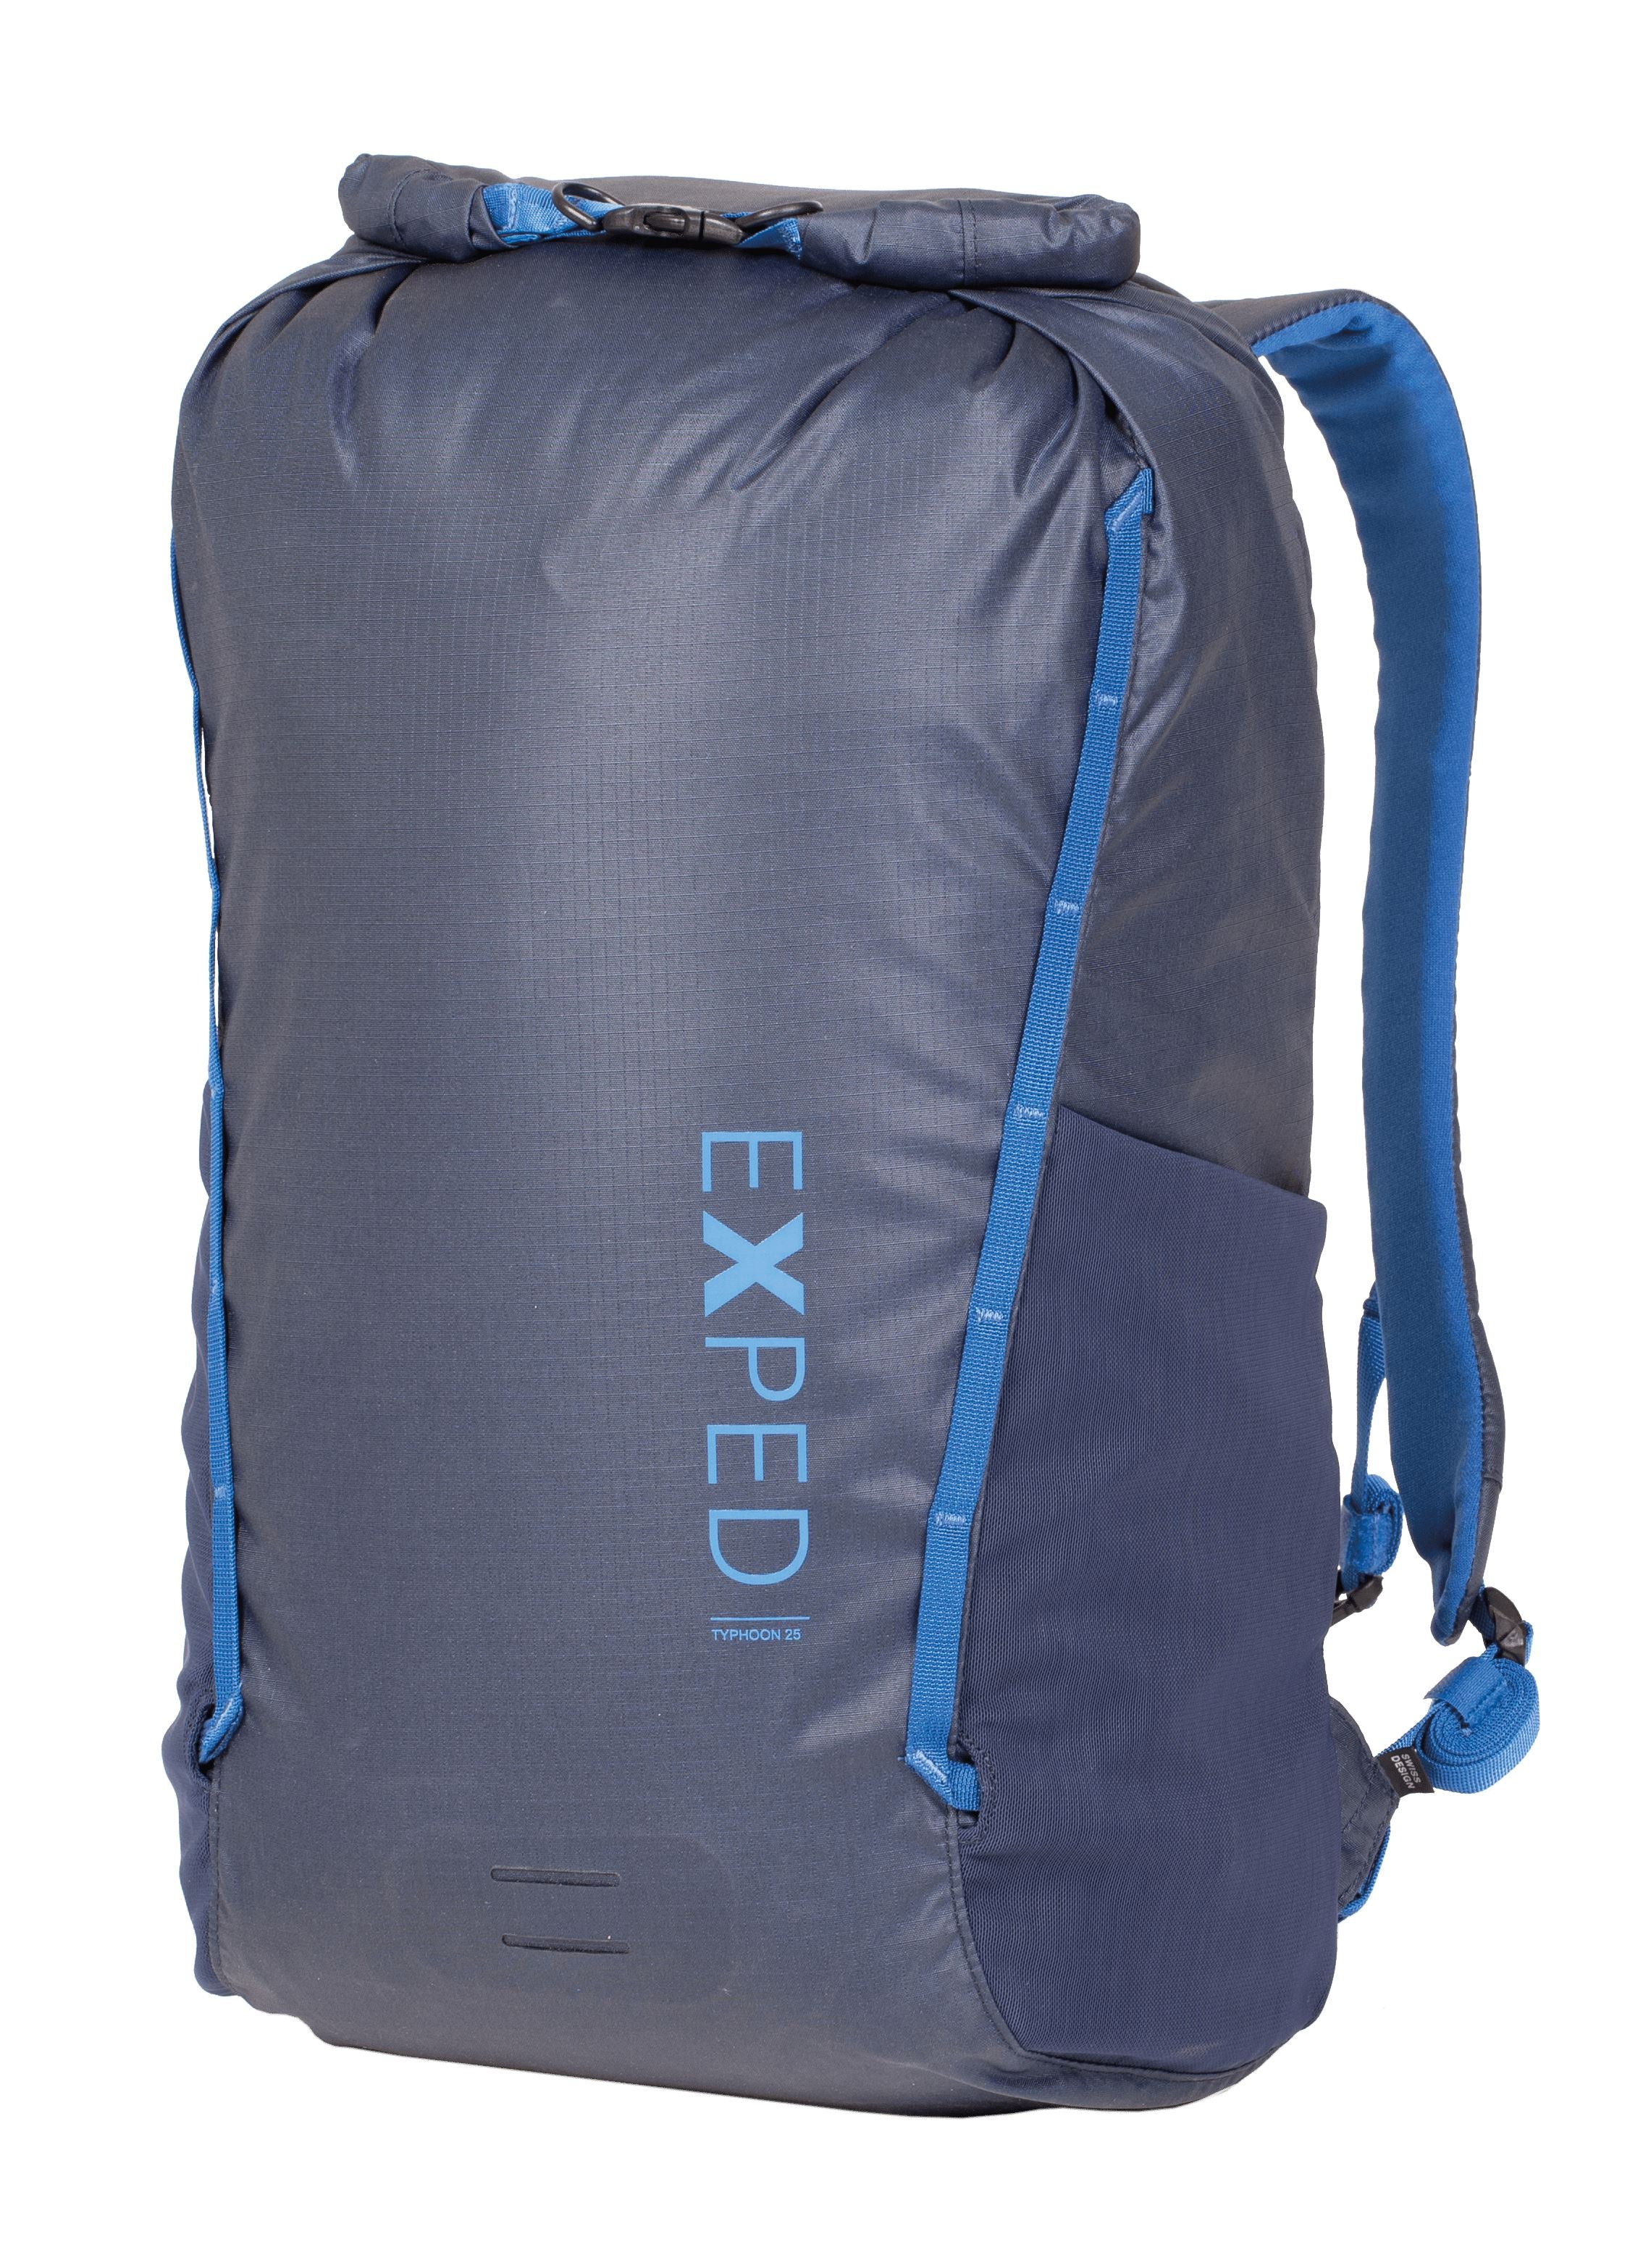 EXPED Typhoon 25 Backpack